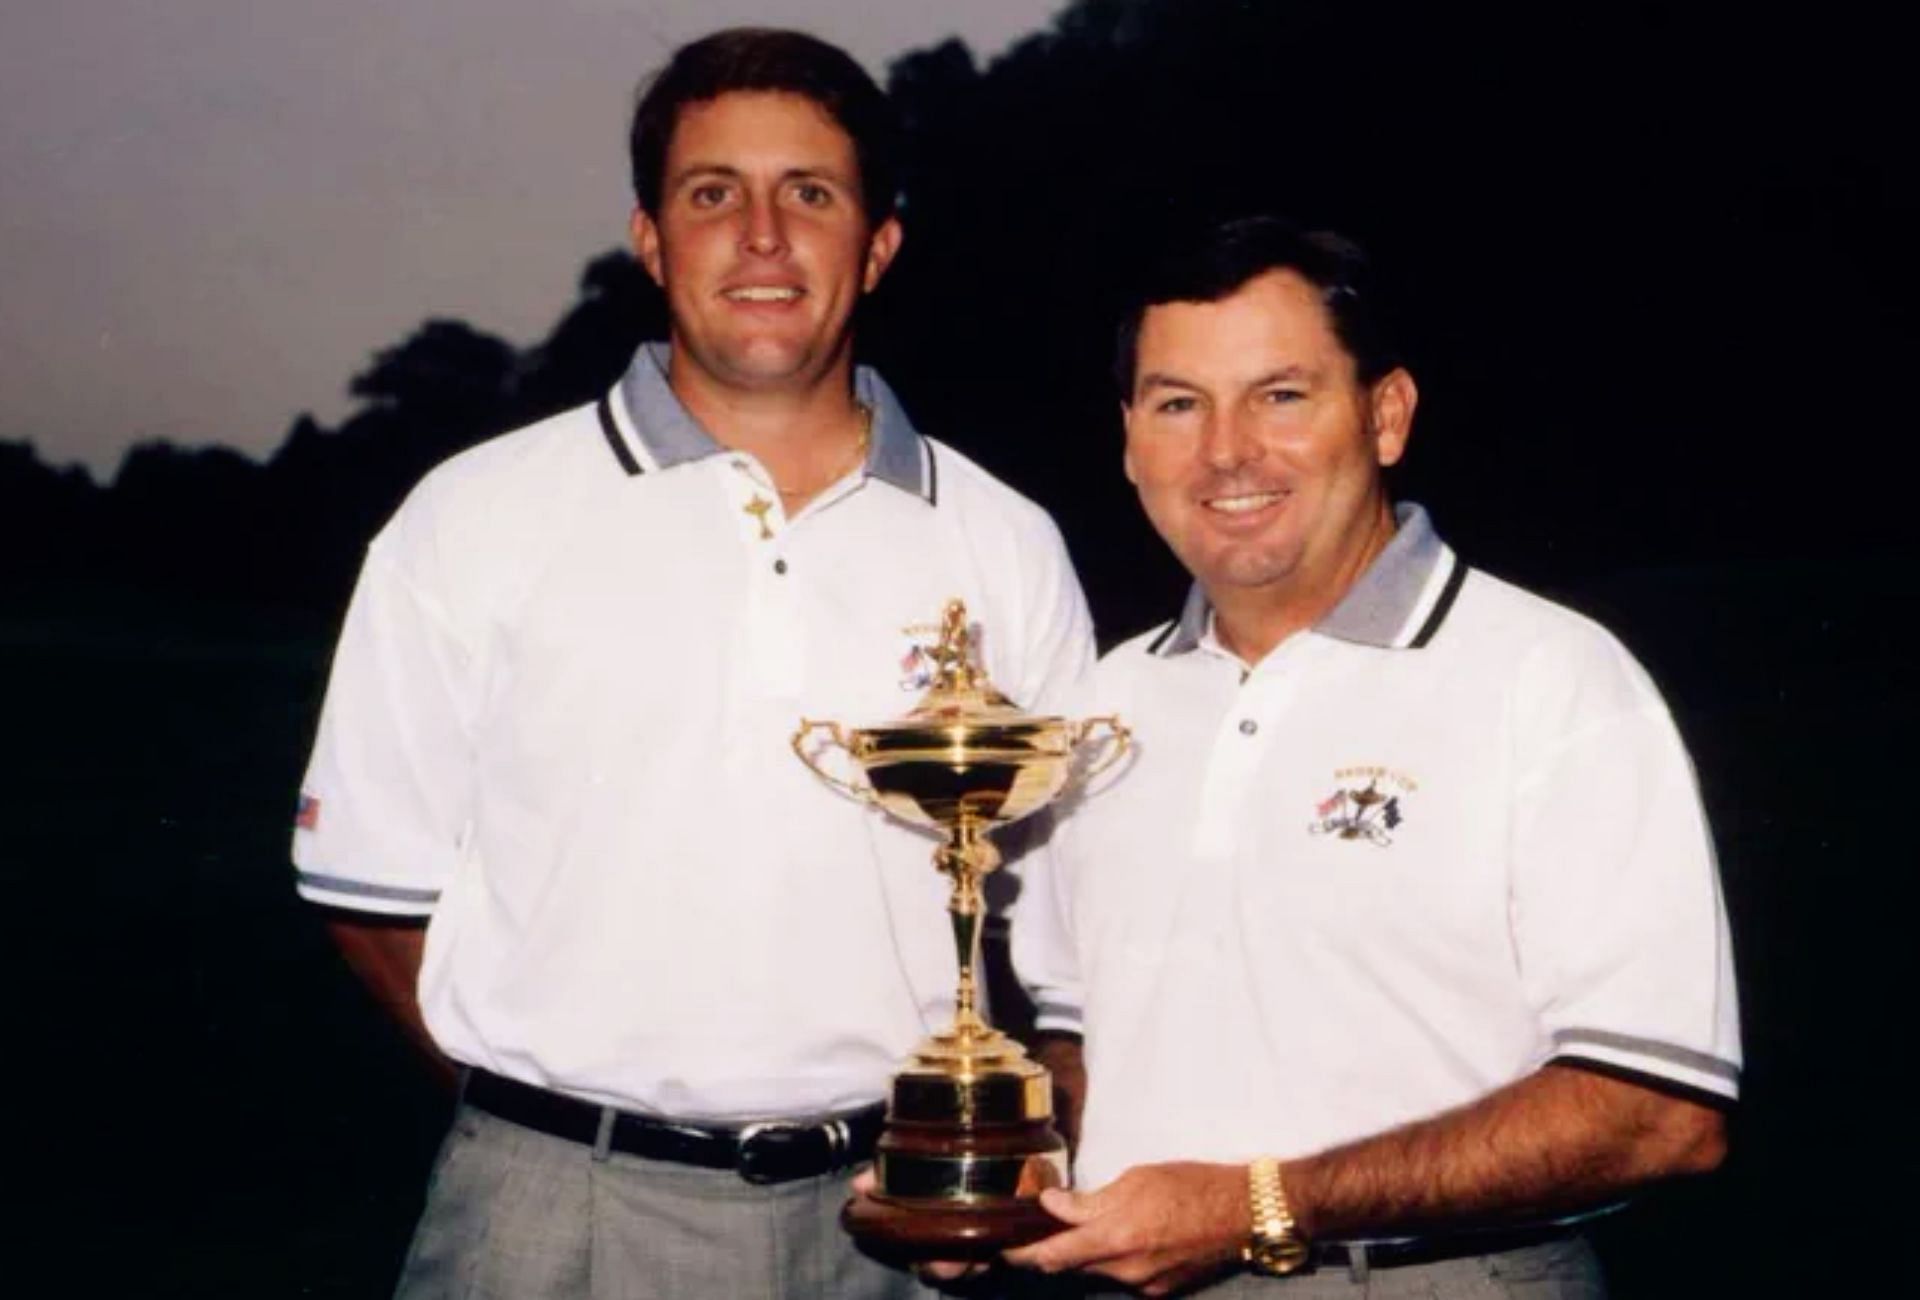 Phil Mickelson and Lanny Wadkins, 1995 Ryder Cup (Image via Twitter @NUCLRGOLF).